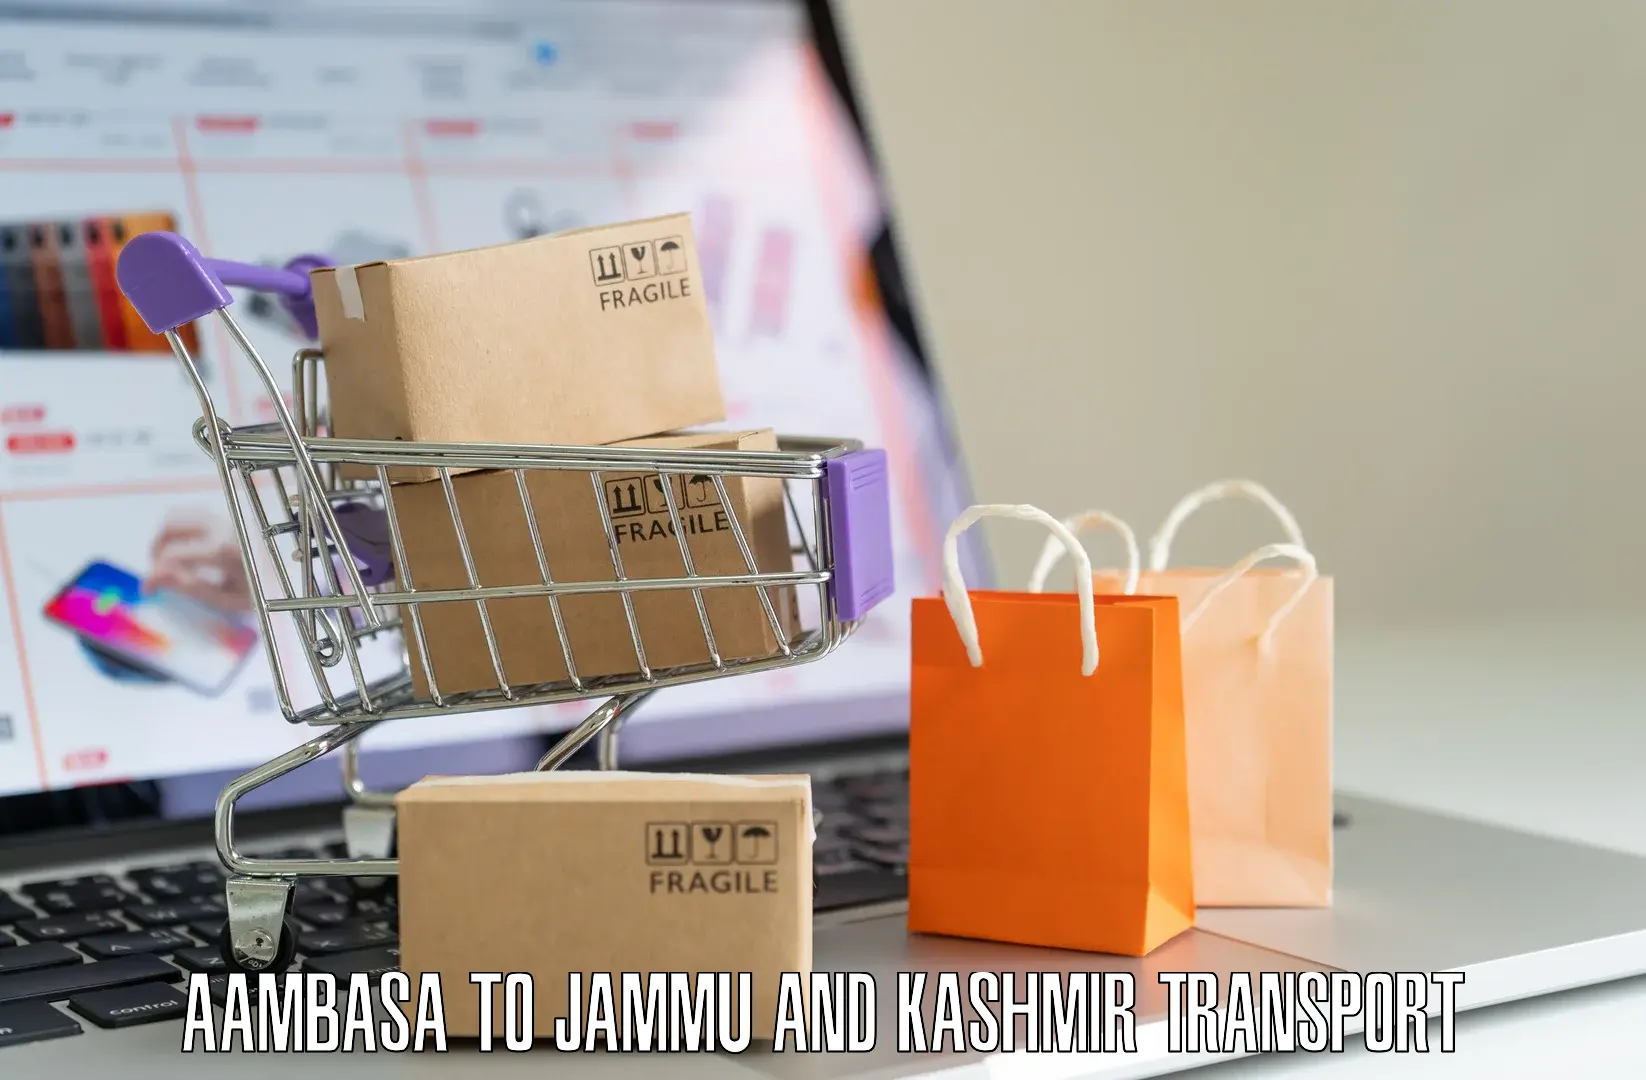 Parcel transport services Aambasa to Baramulla